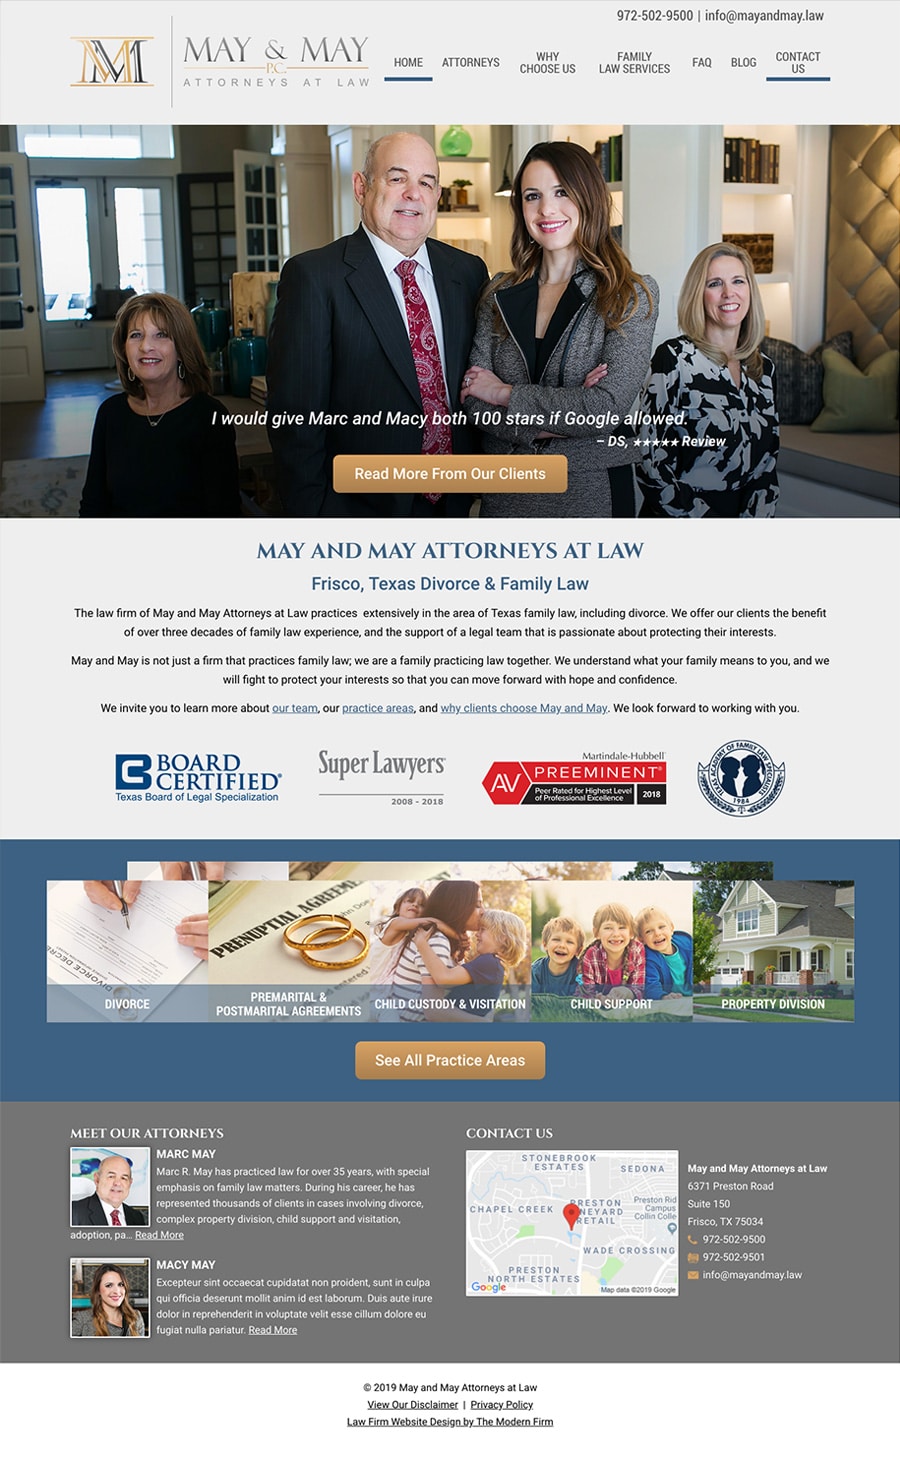 Law Firm Website for May and May Attorneys at Law